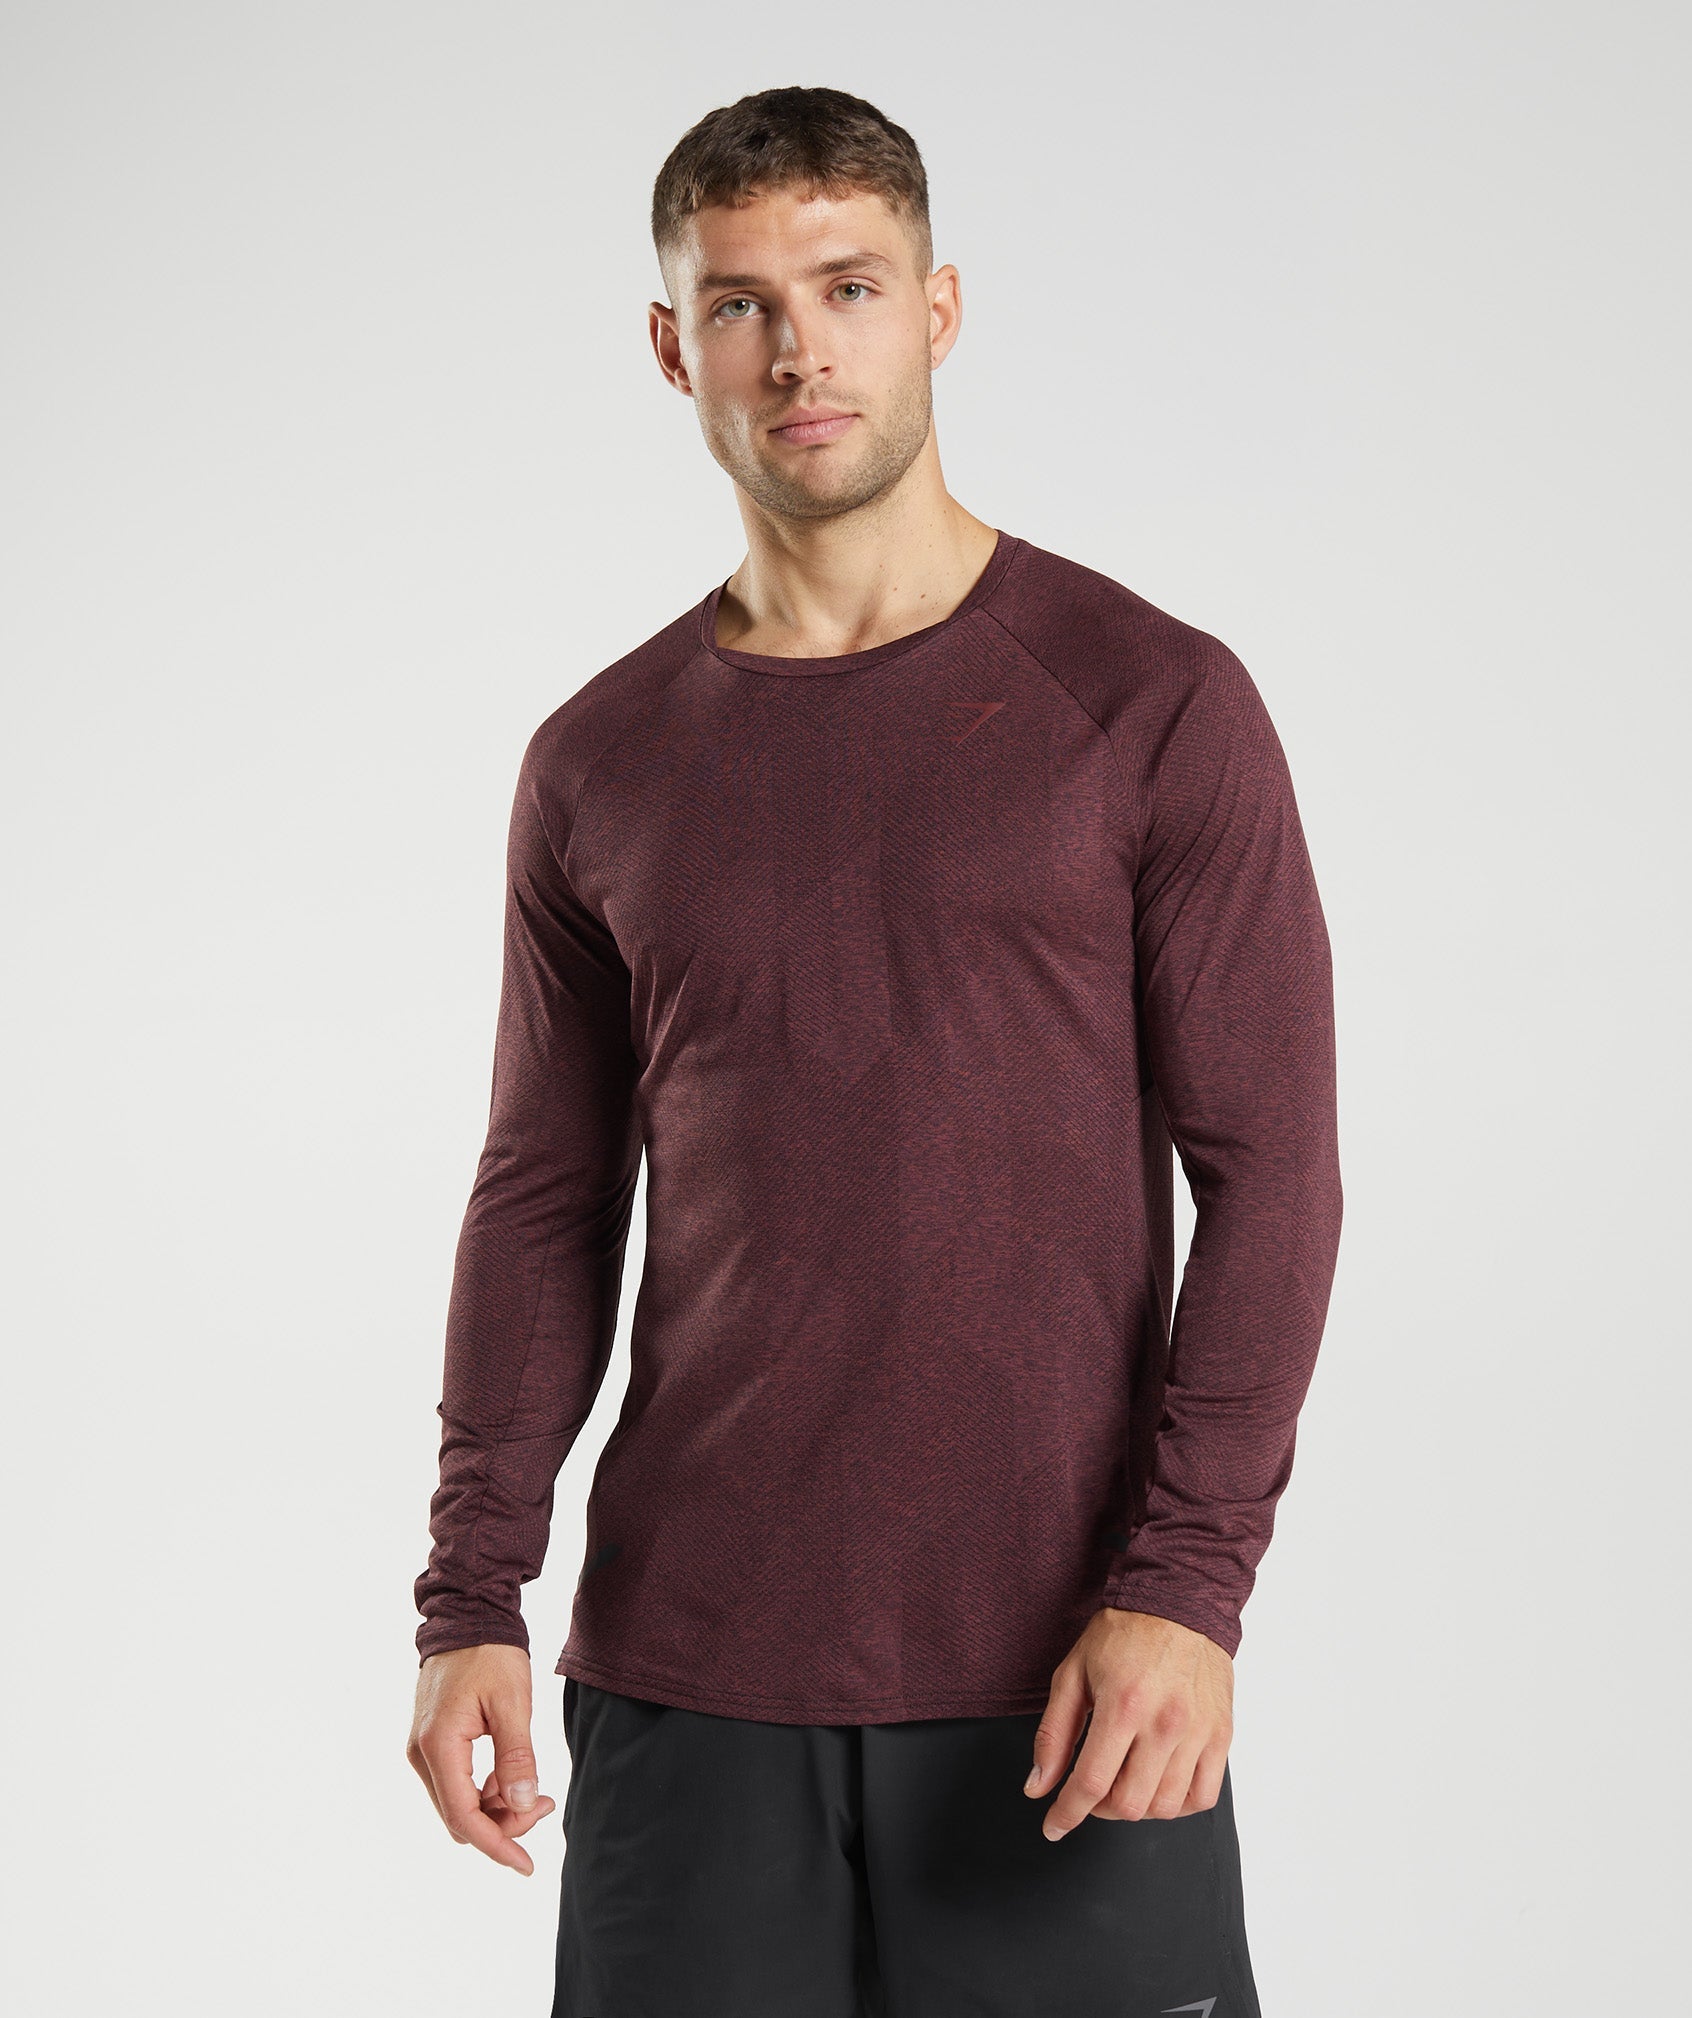 Apex Long Sleeve T-Shirt in Cherry Brown - view 1